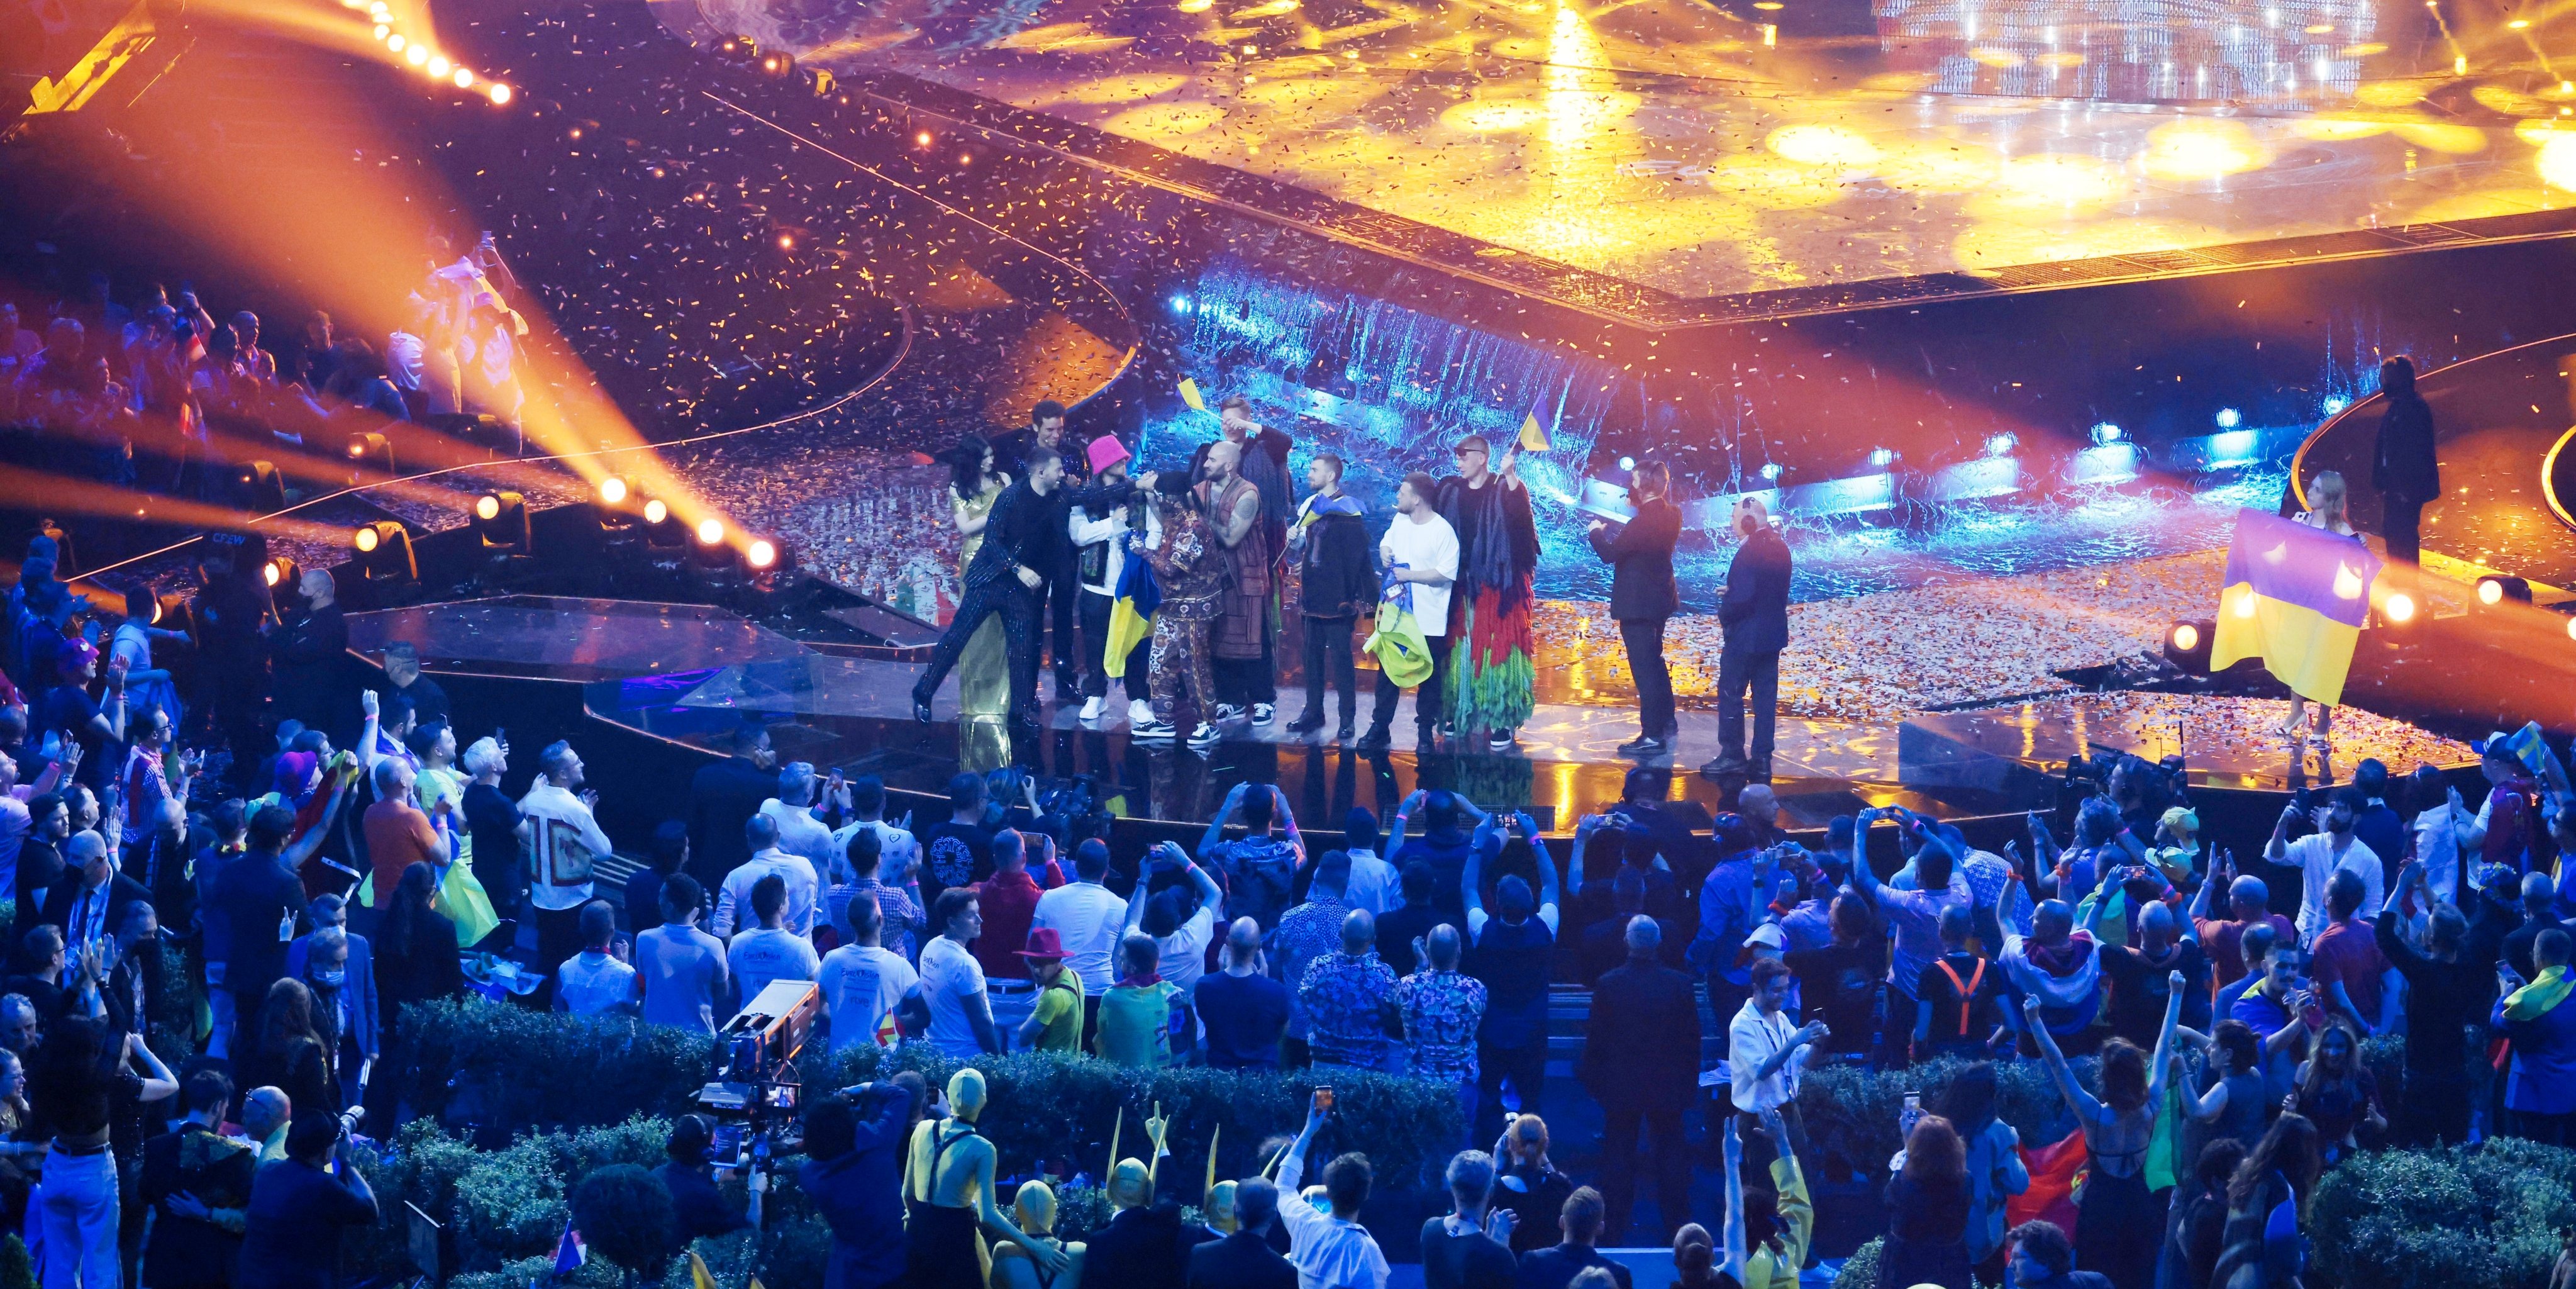 66th Eurovision Song Contest - Grand Final